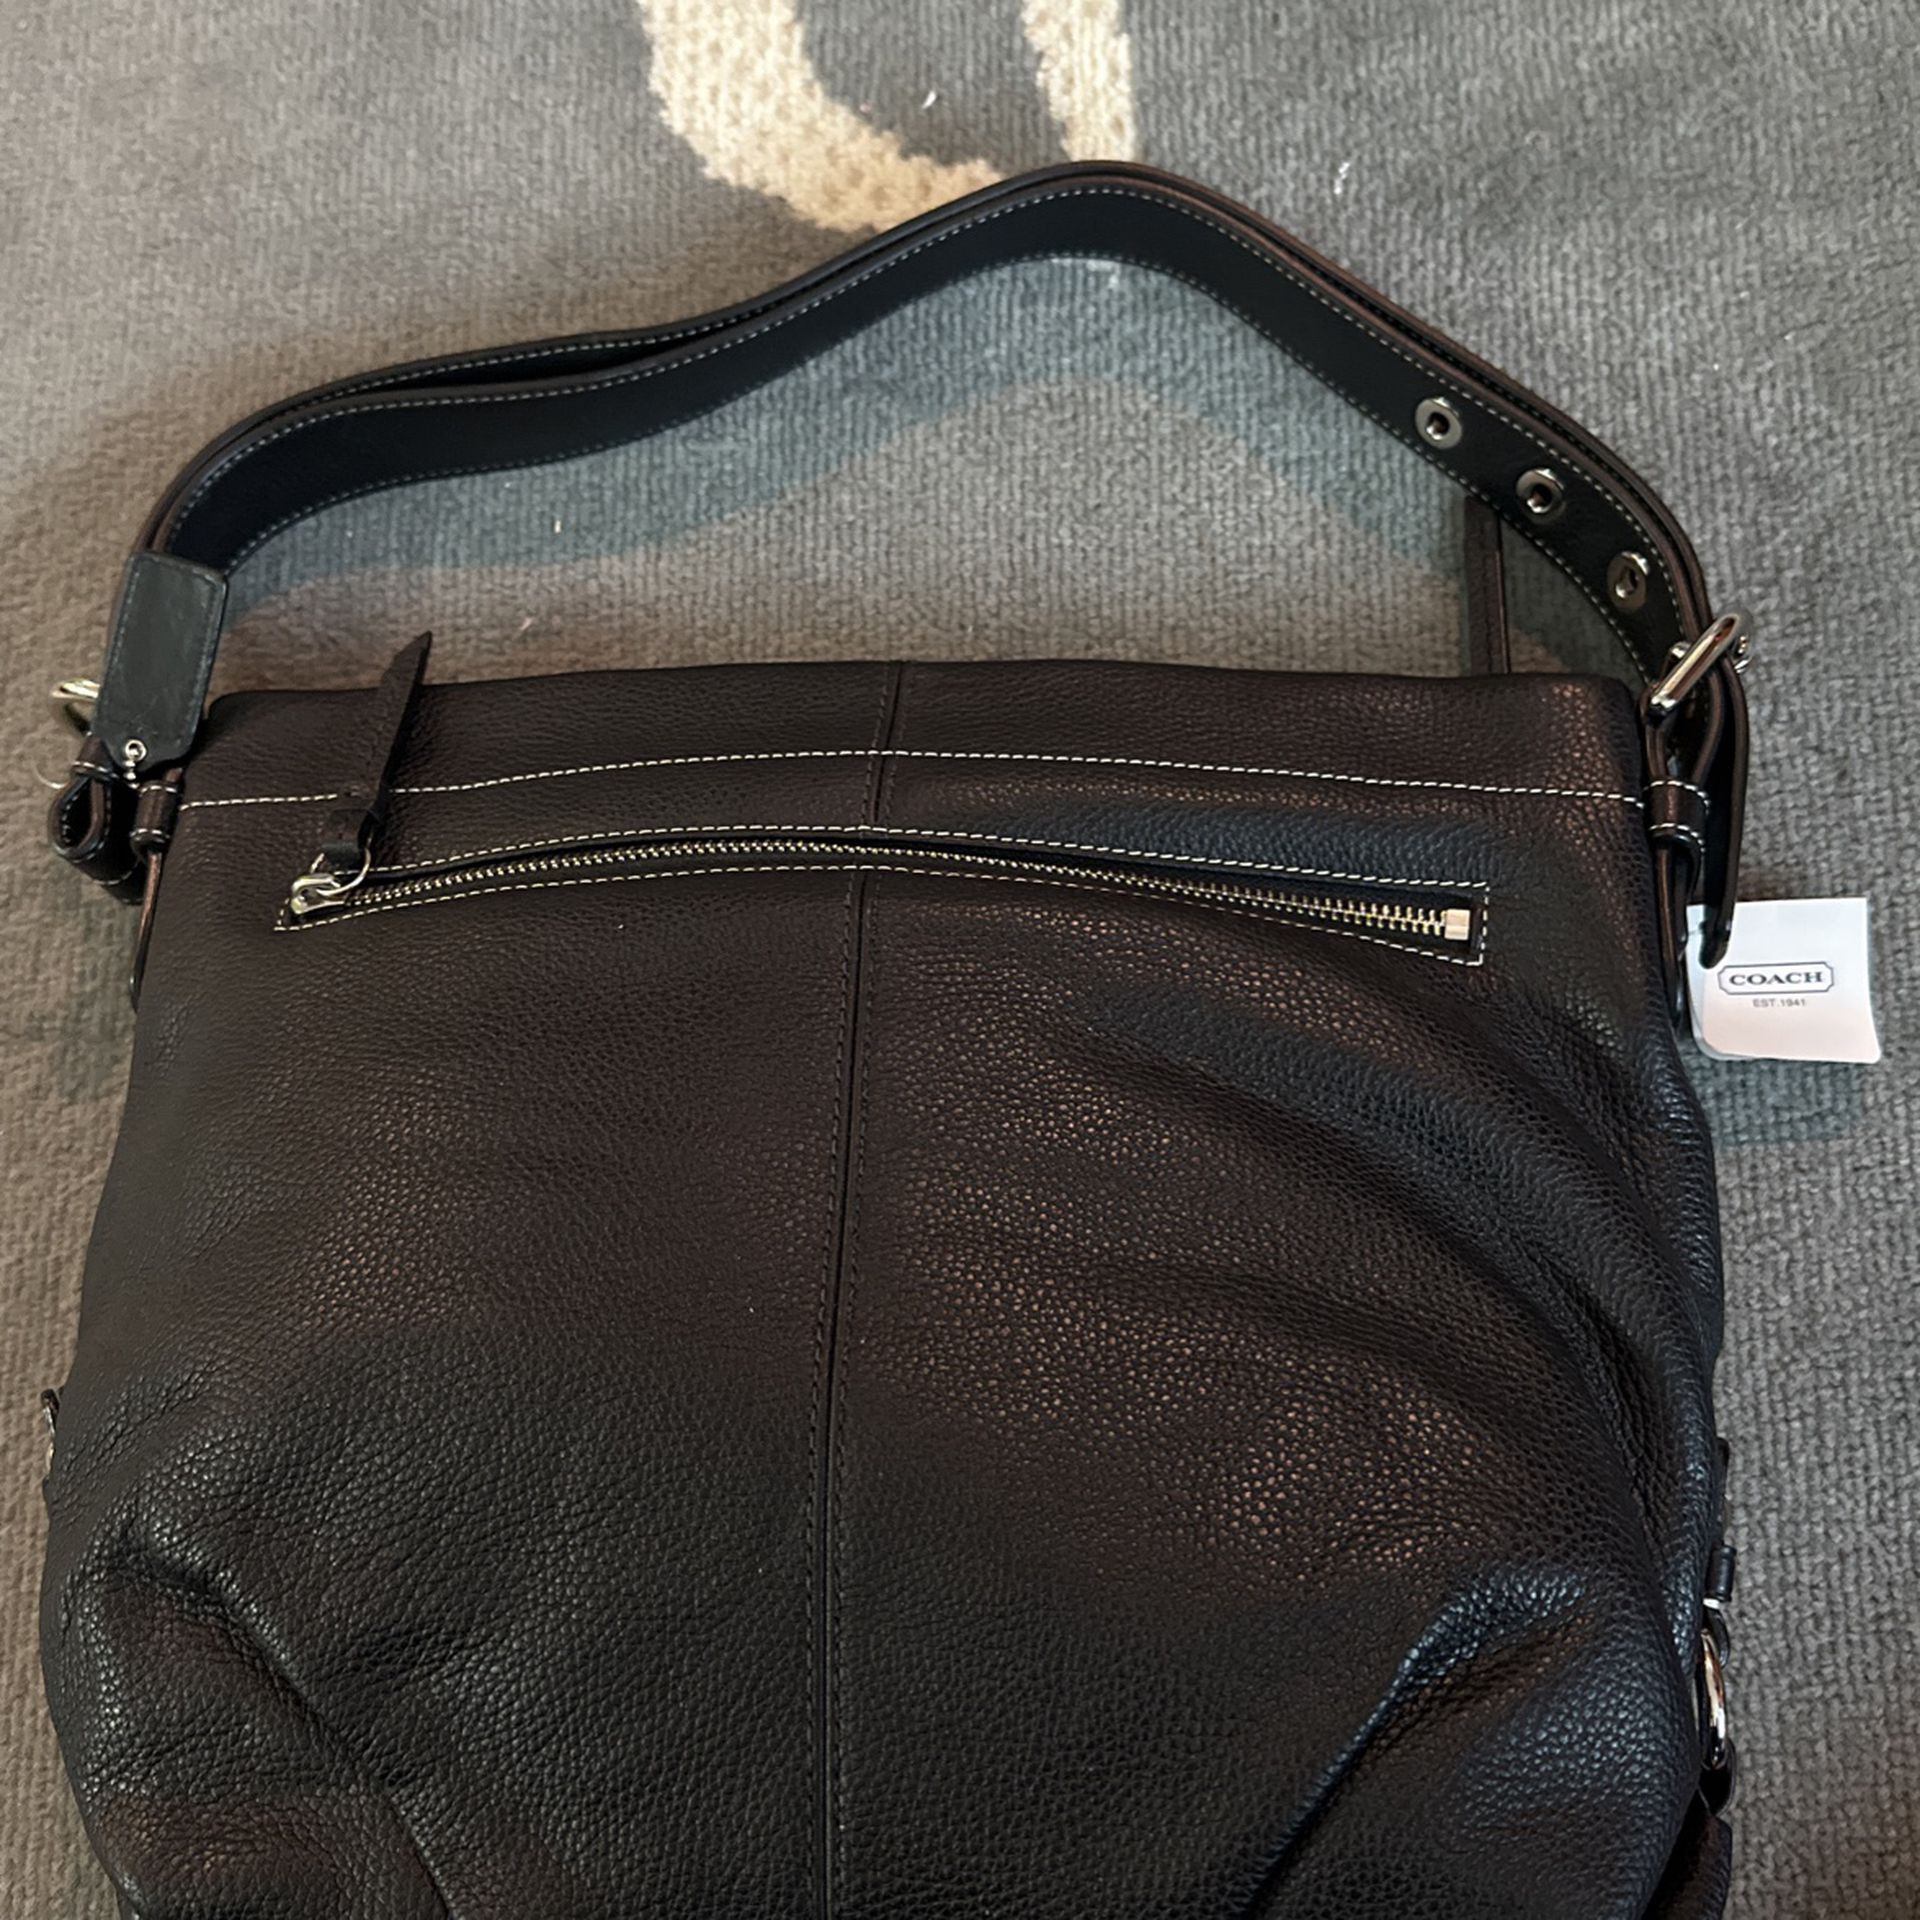 Original Coach Purse for Sale in New York, NY - OfferUp